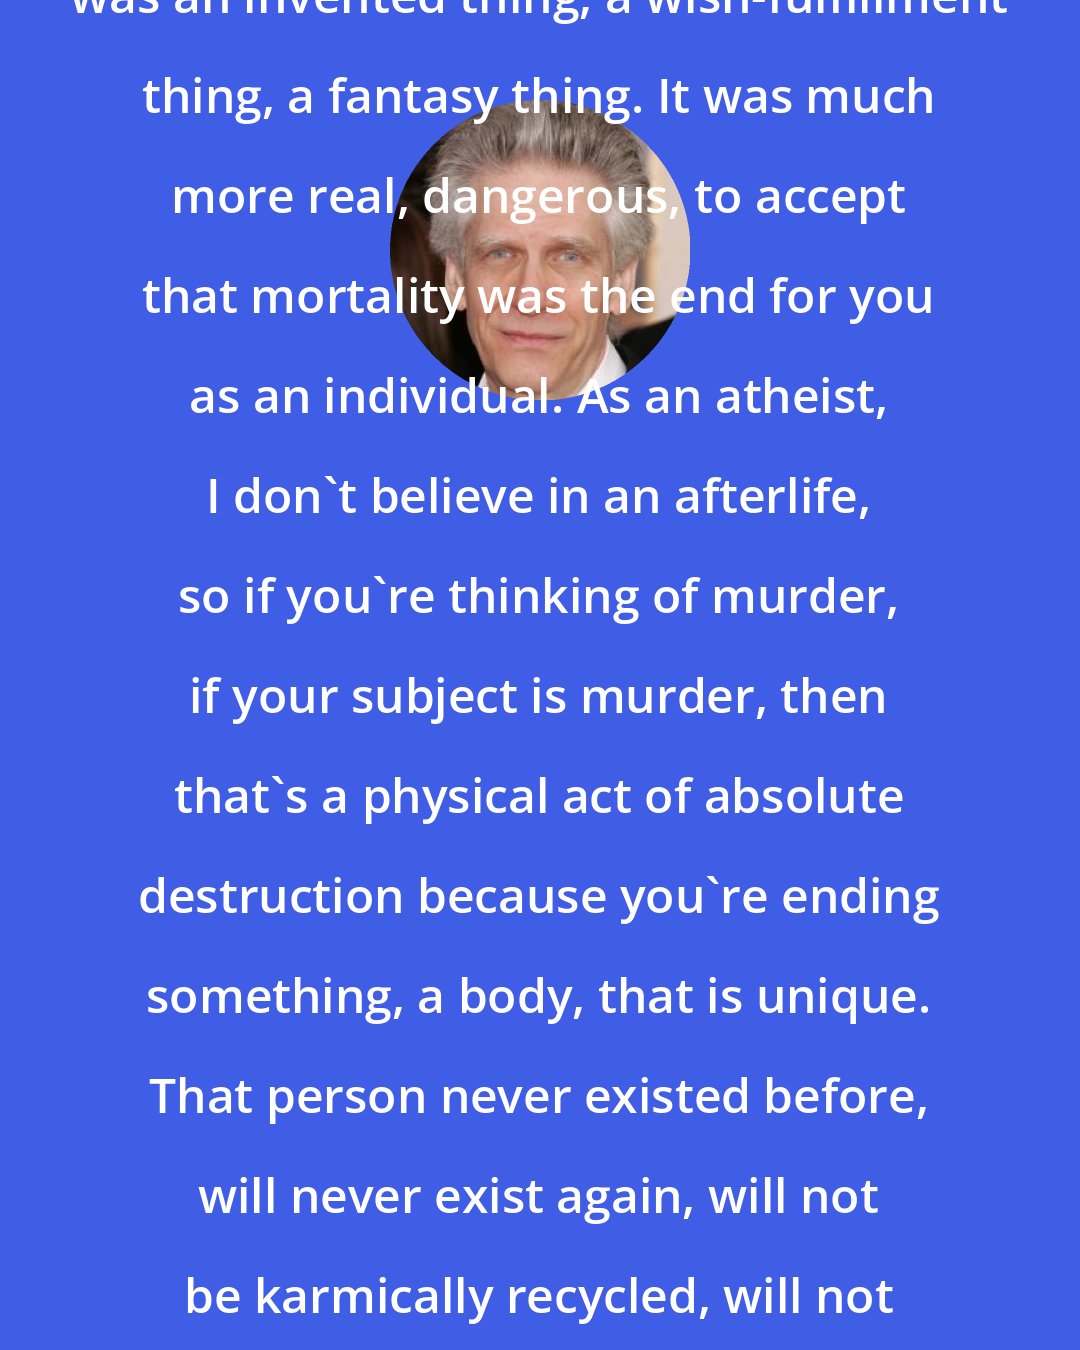 David Cronenberg: It was apparent to me that religion was an invented thing, a wish-fulfillment thing, a fantasy thing. It was much more real, dangerous, to accept that mortality was the end for you as an individual. As an atheist, I don't believe in an afterlife, so if you're thinking of murder, if your subject is murder, then that's a physical act of absolute destruction because you're ending something, a body, that is unique. That person never existed before, will never exist again, will not be karmically recycled, will not go to heaven, therefore I take it seriously.